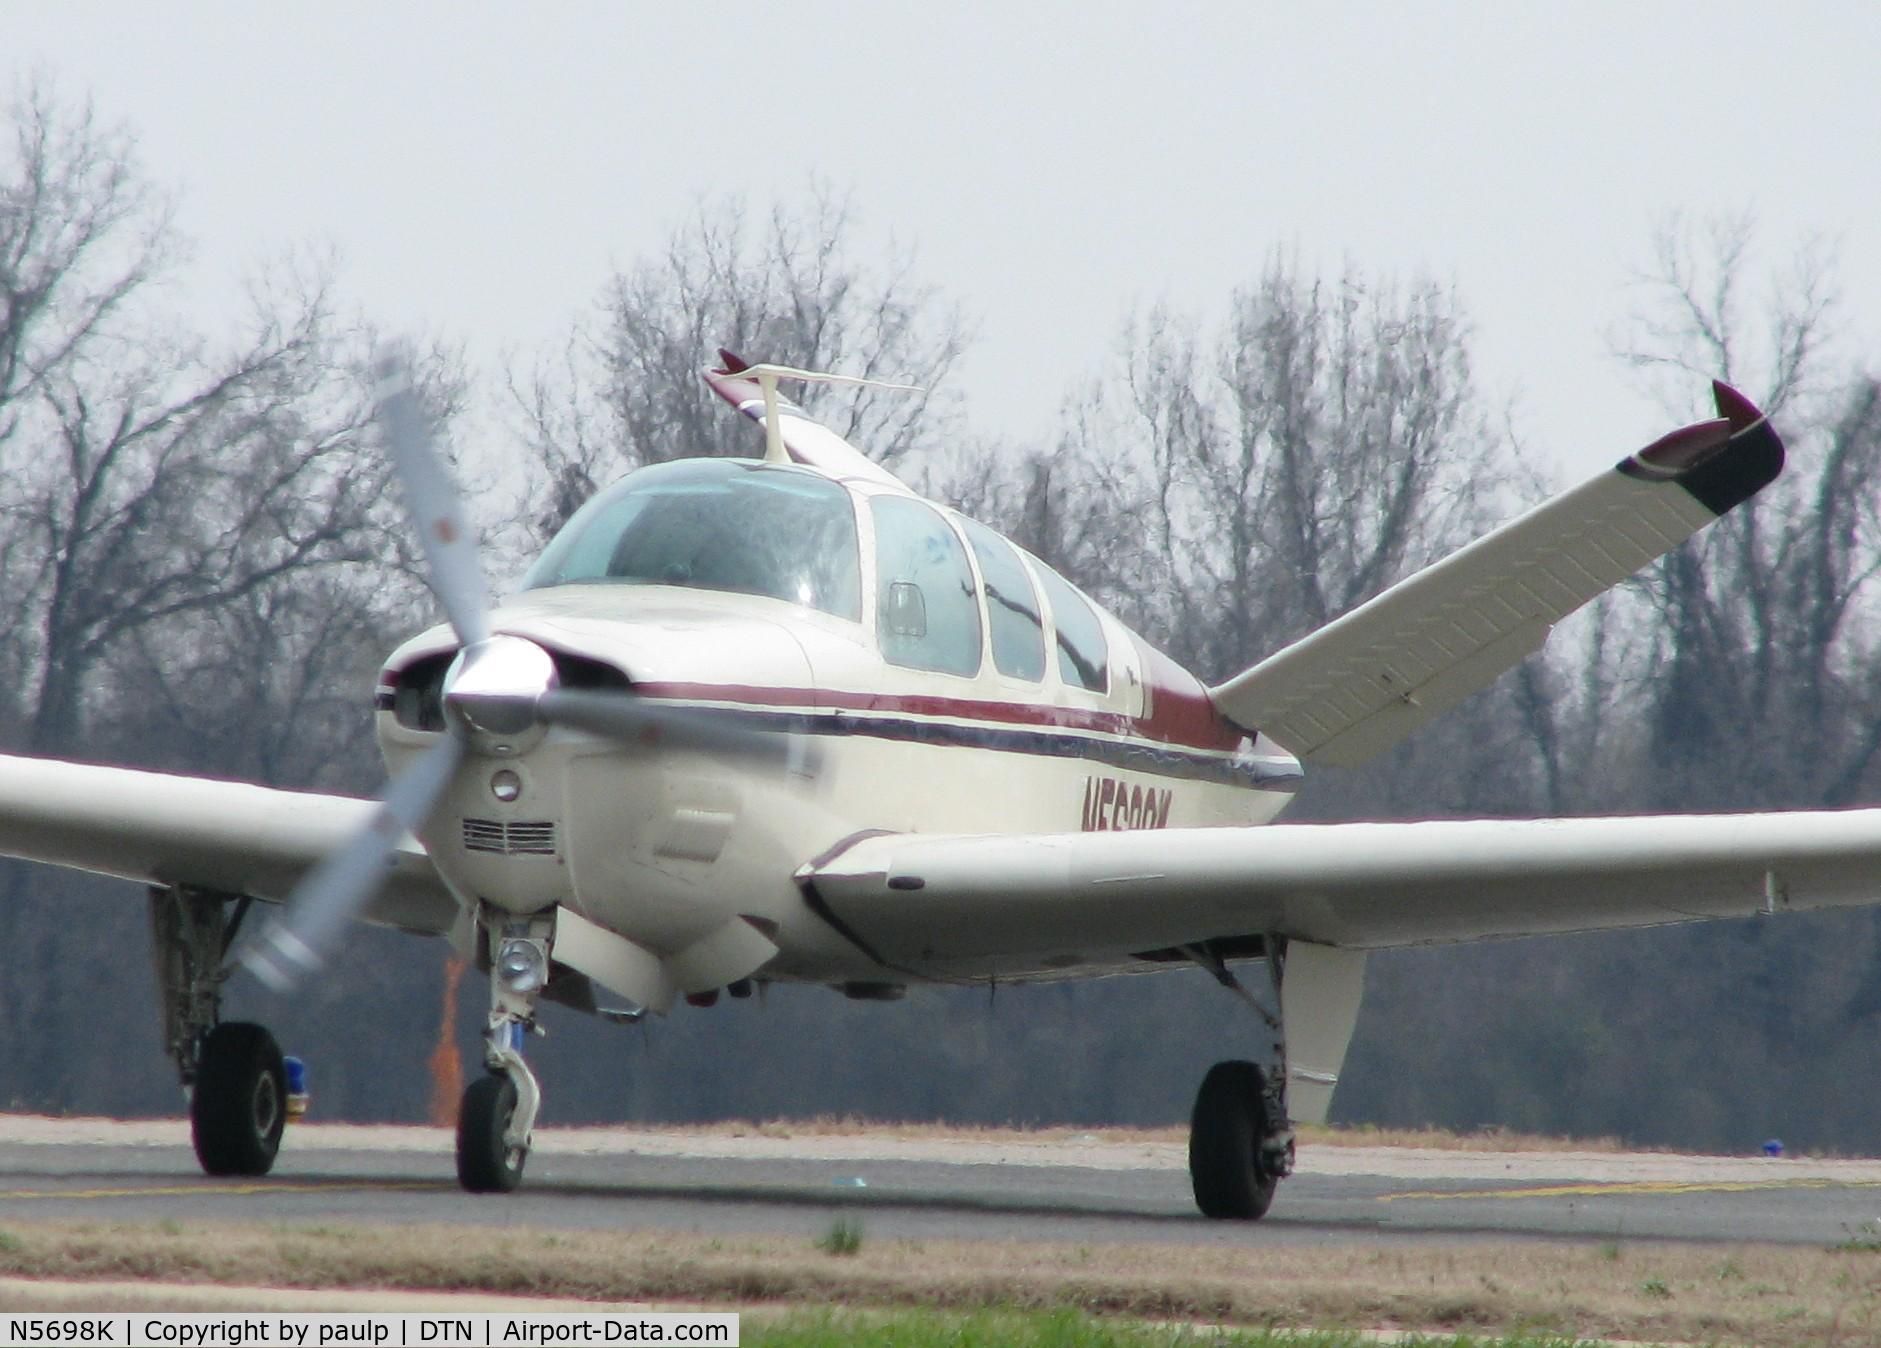 N5698K, 1964 Beech S35 Bonanza C/N D-7622, Taxiing on Foxtrot to 14 at Downtown Shreveport.